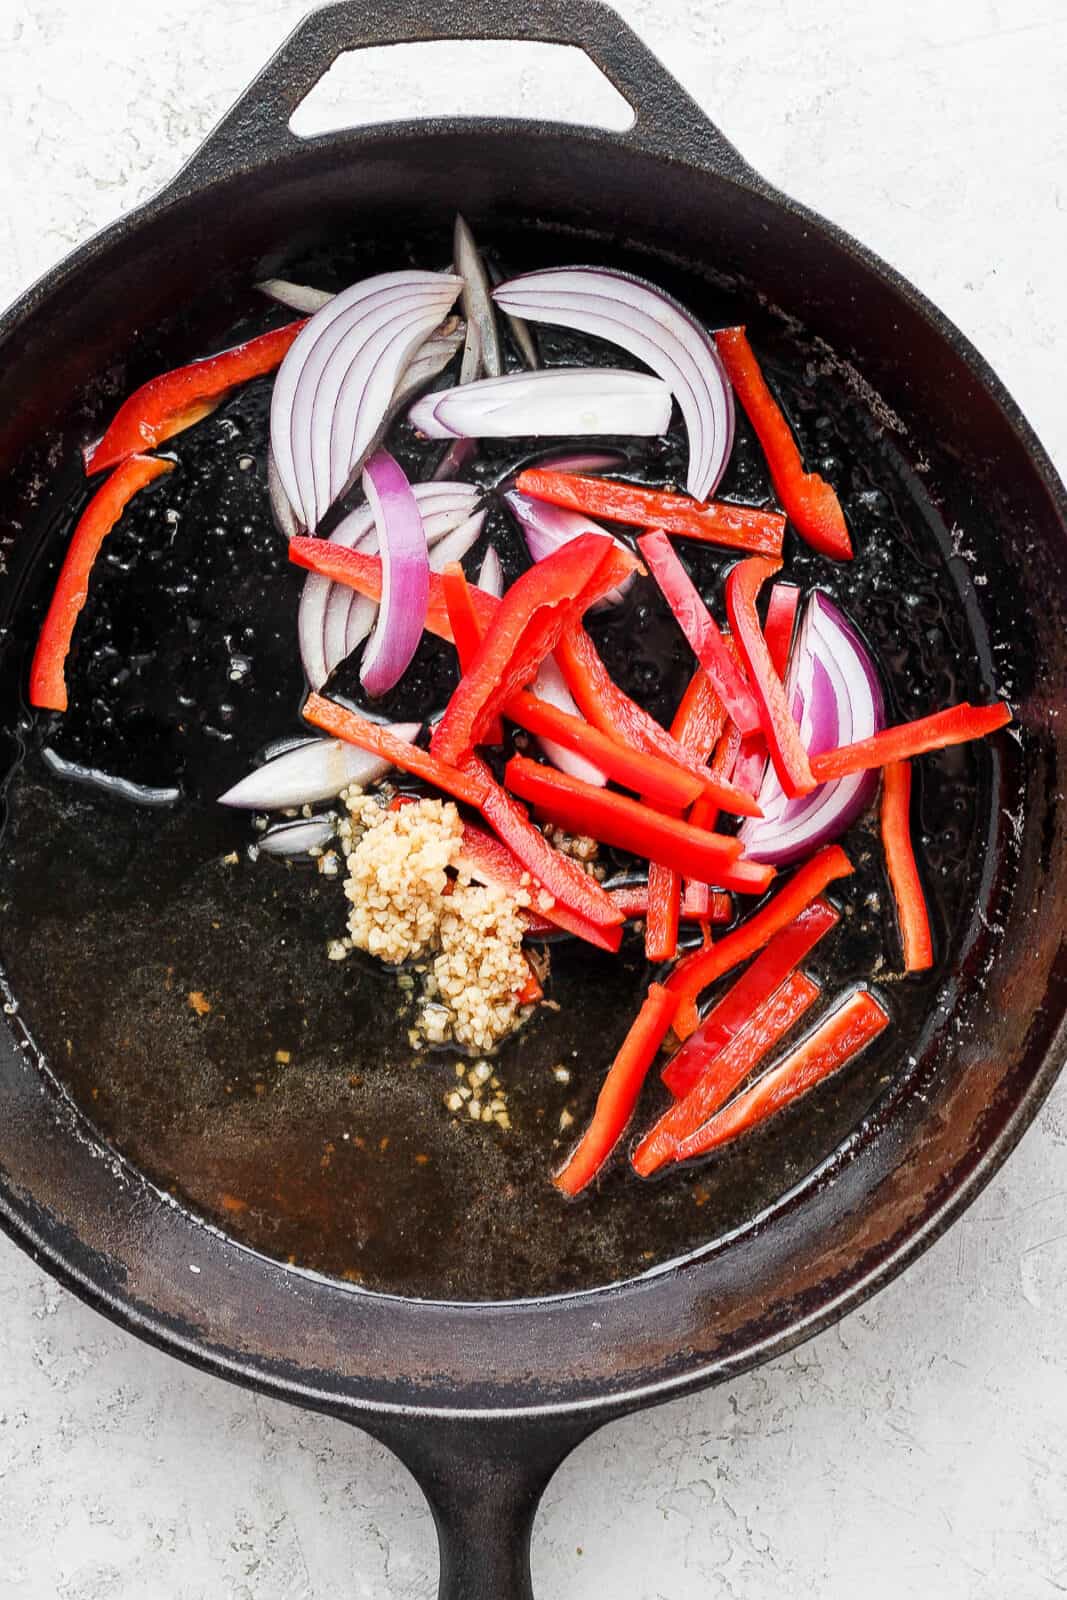 Cast iron skillet with garlic, red onion and red bell pepper inside.